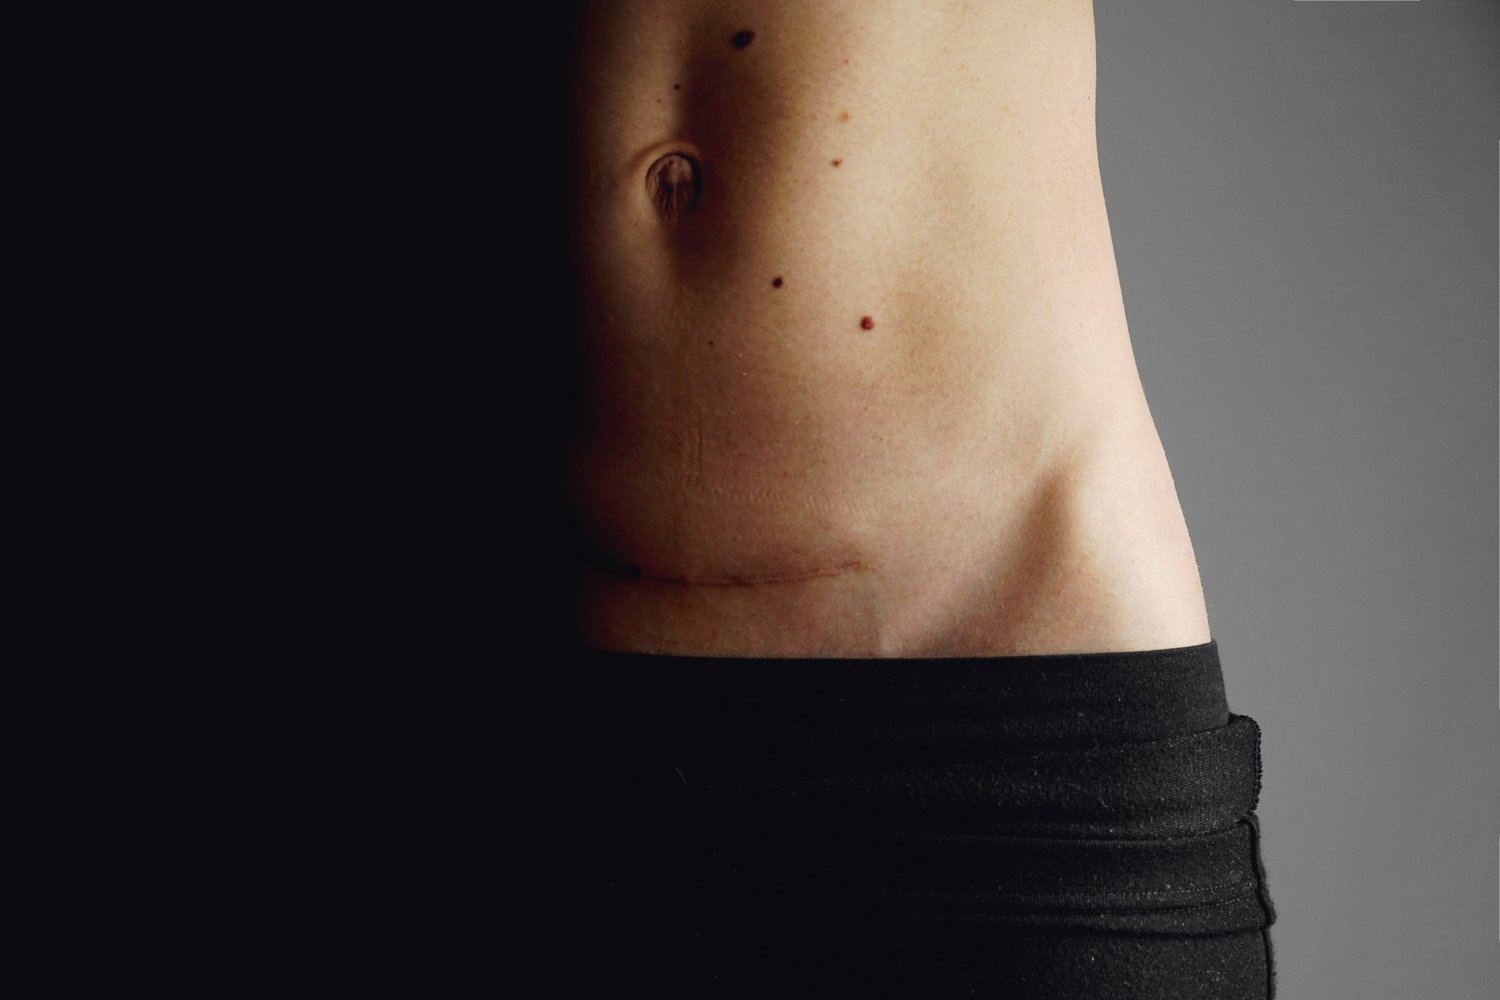 C-section scar on belly